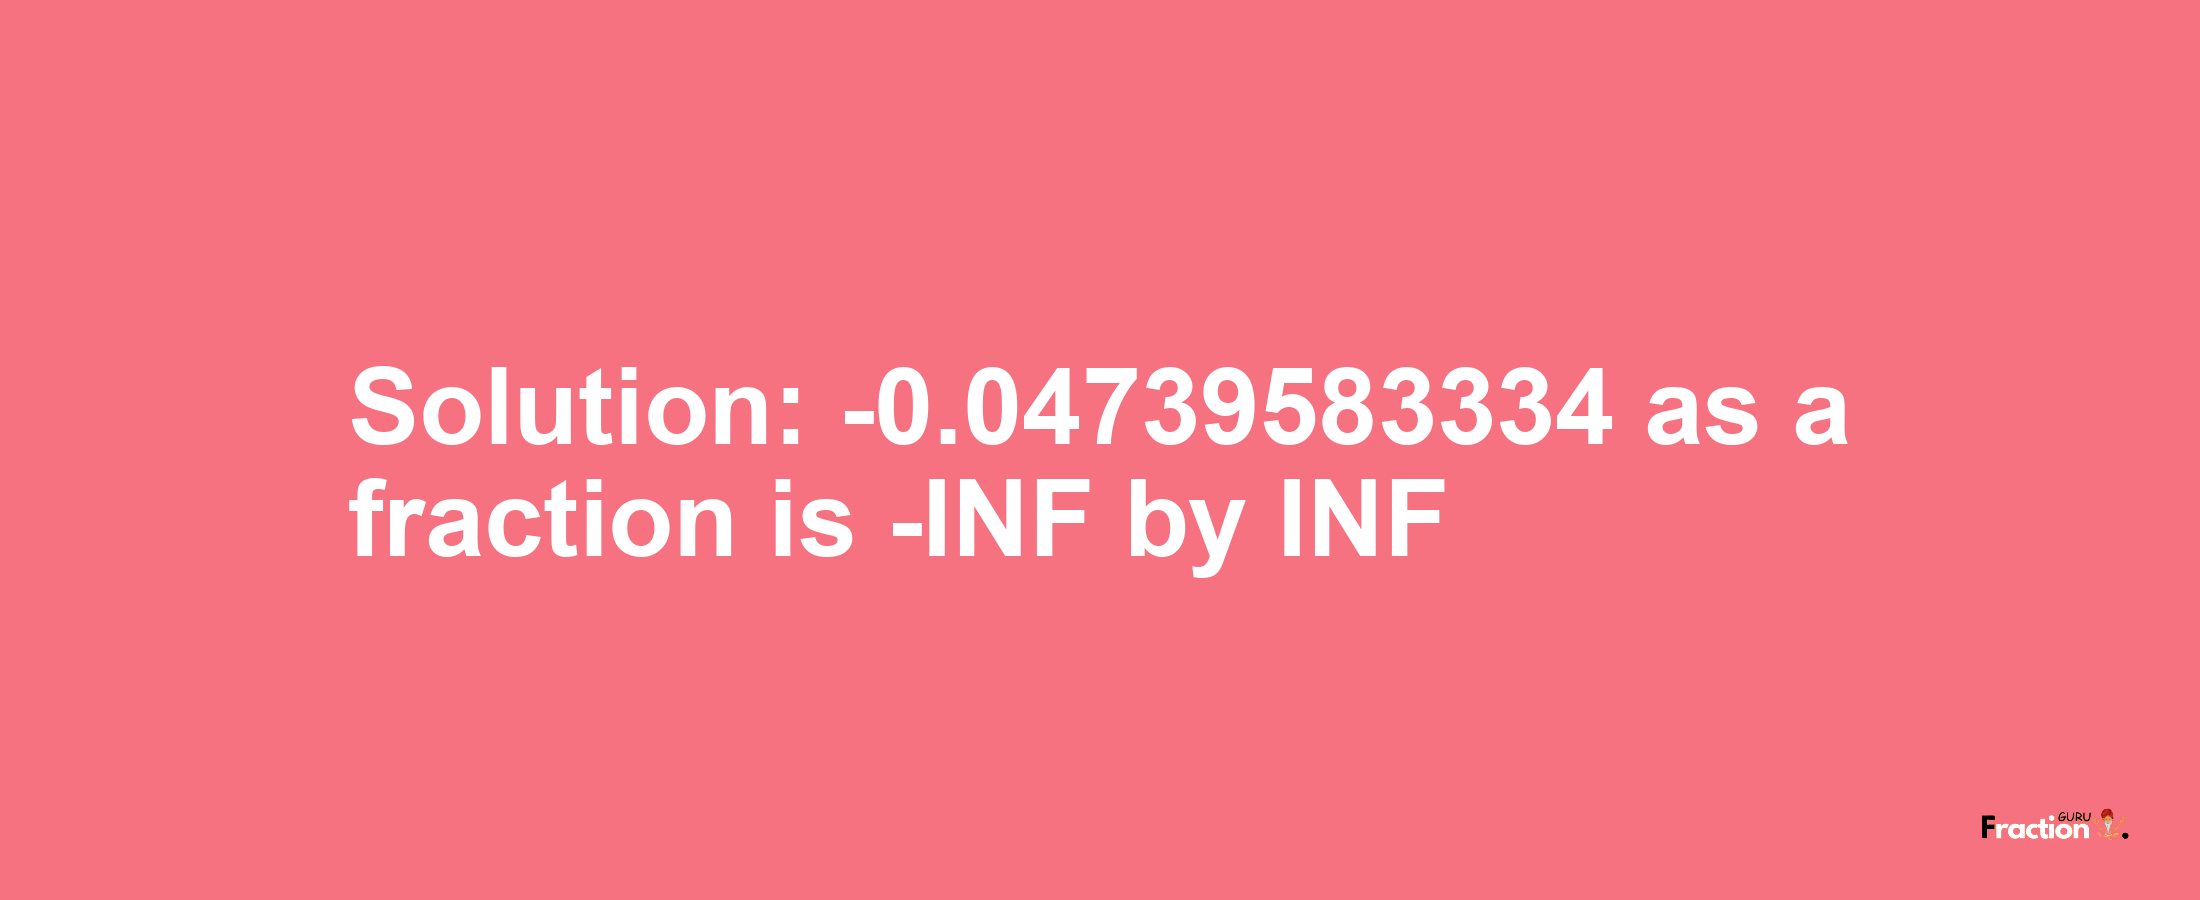 Solution:-0.04739583334 as a fraction is -INF/INF